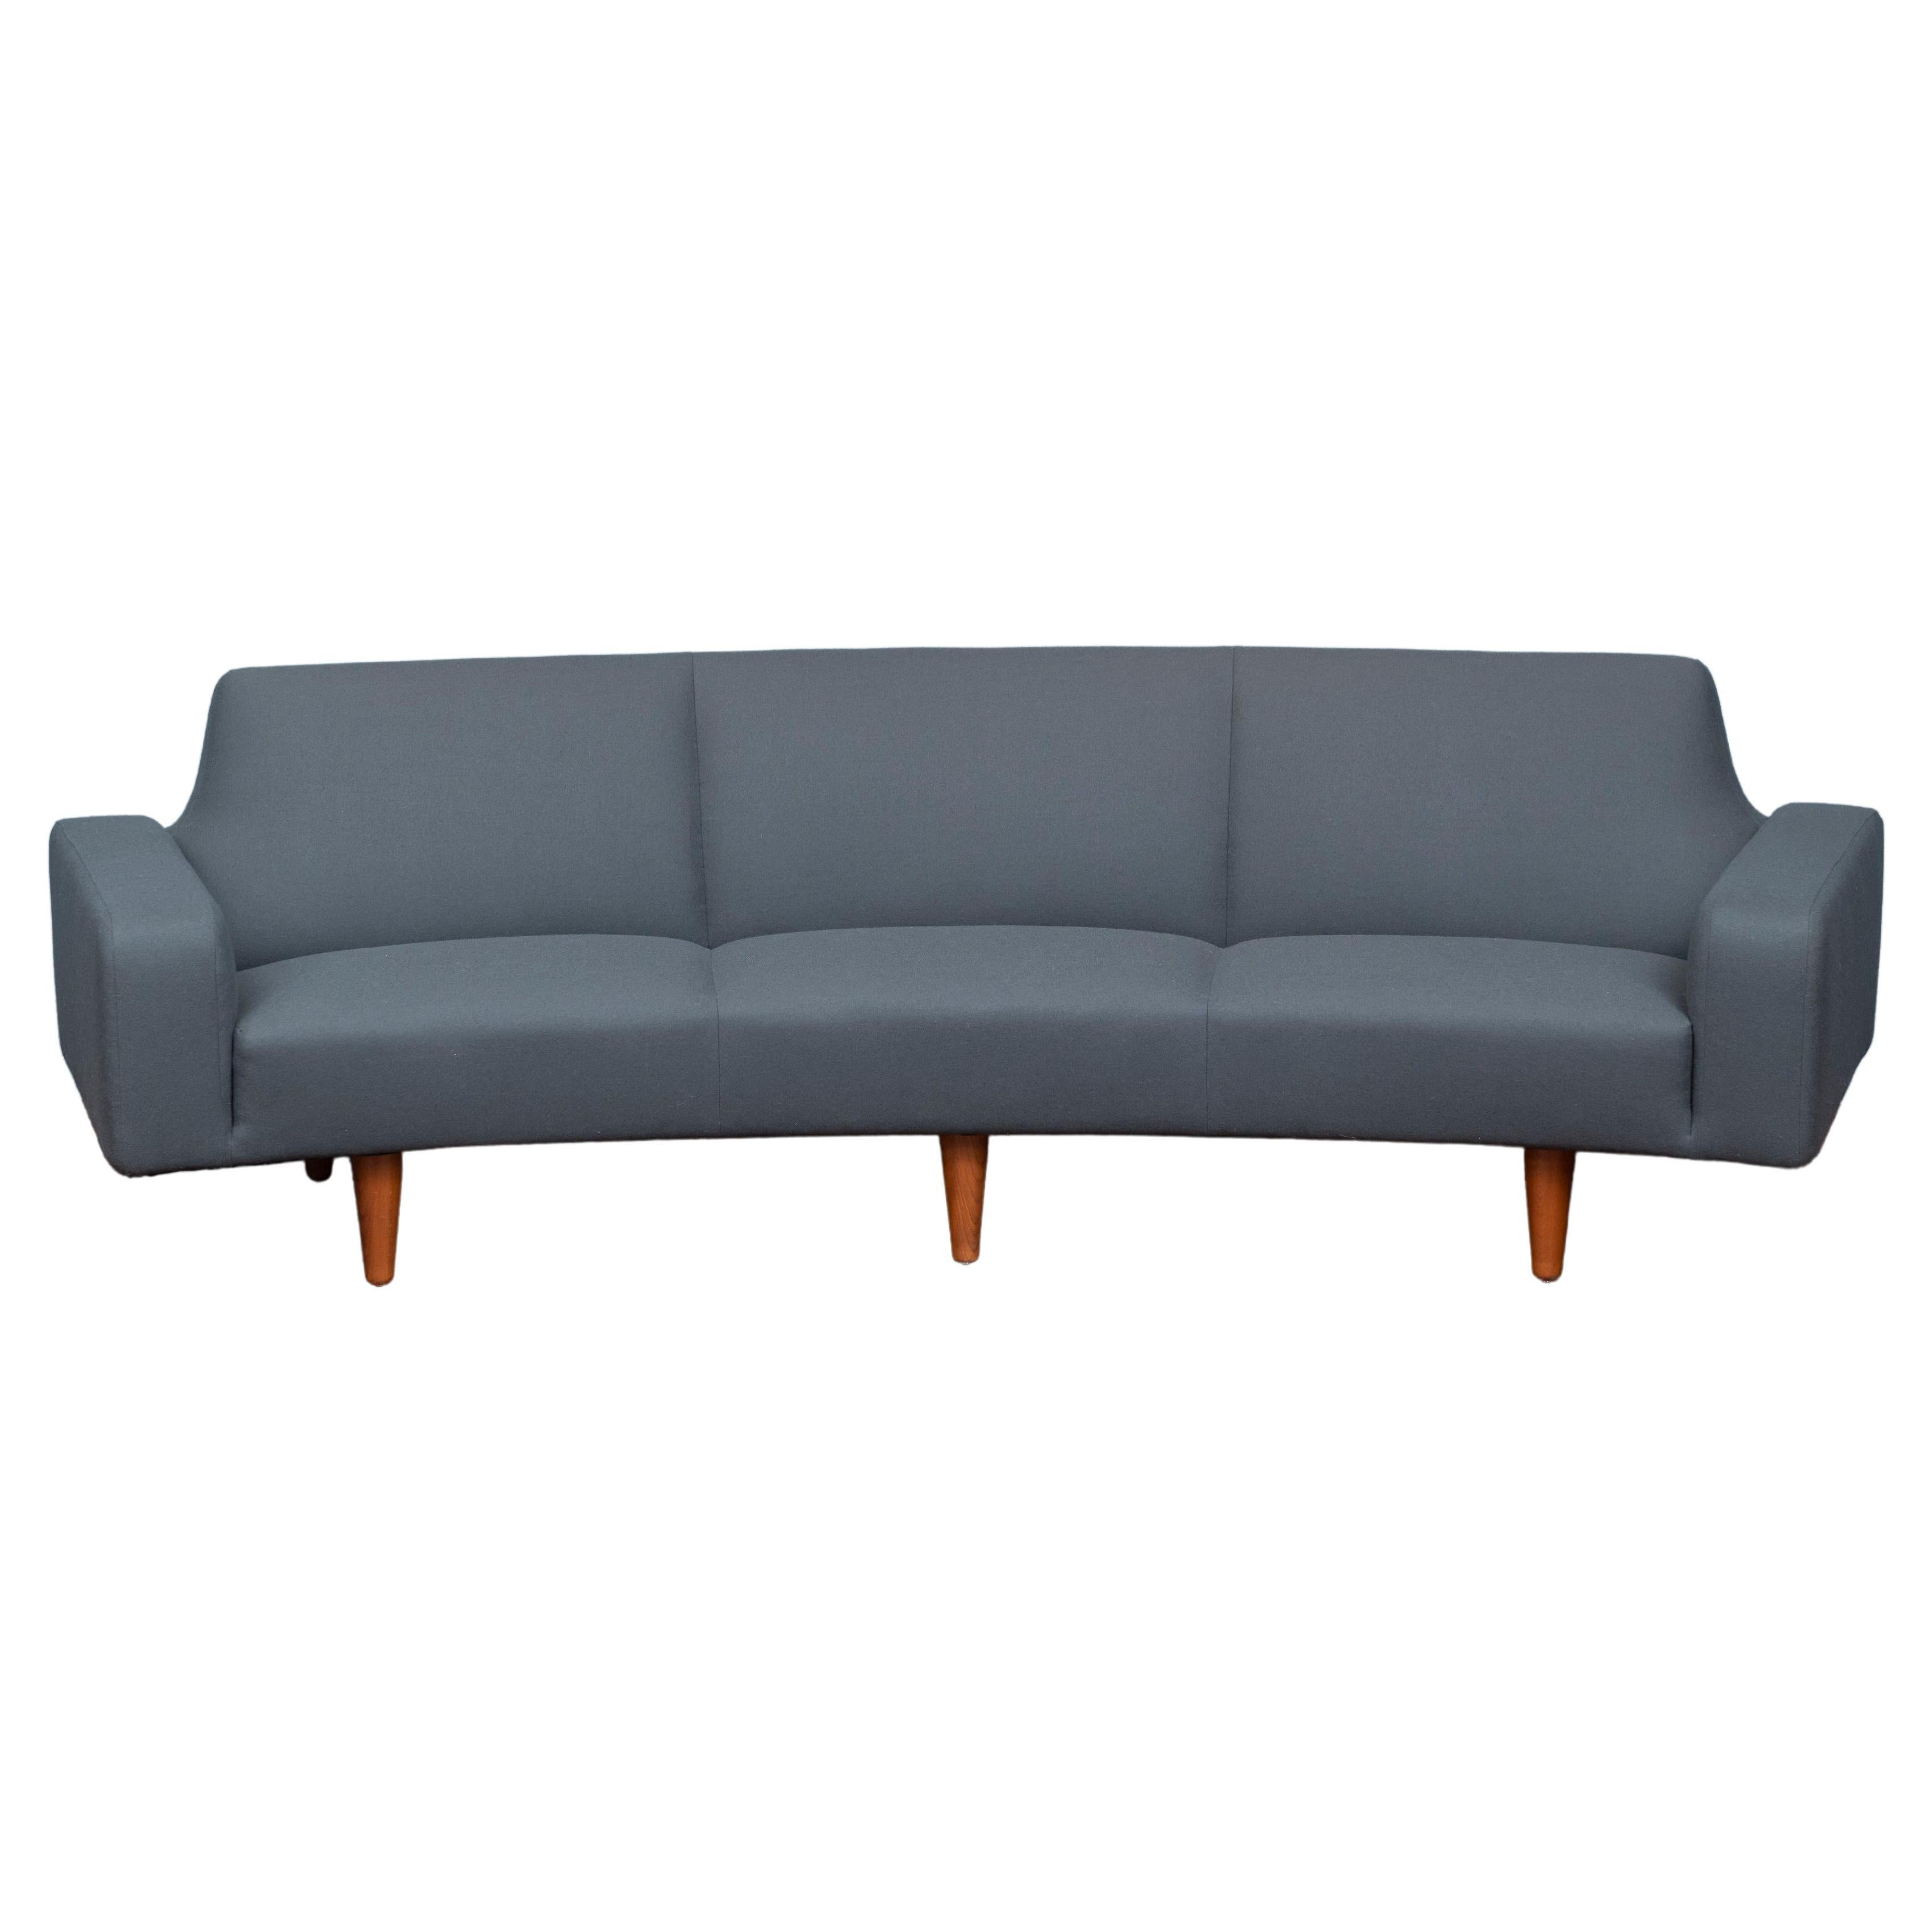 Illum Wikkelso Curved Sofa Model 450 For Sale at 1stDibs